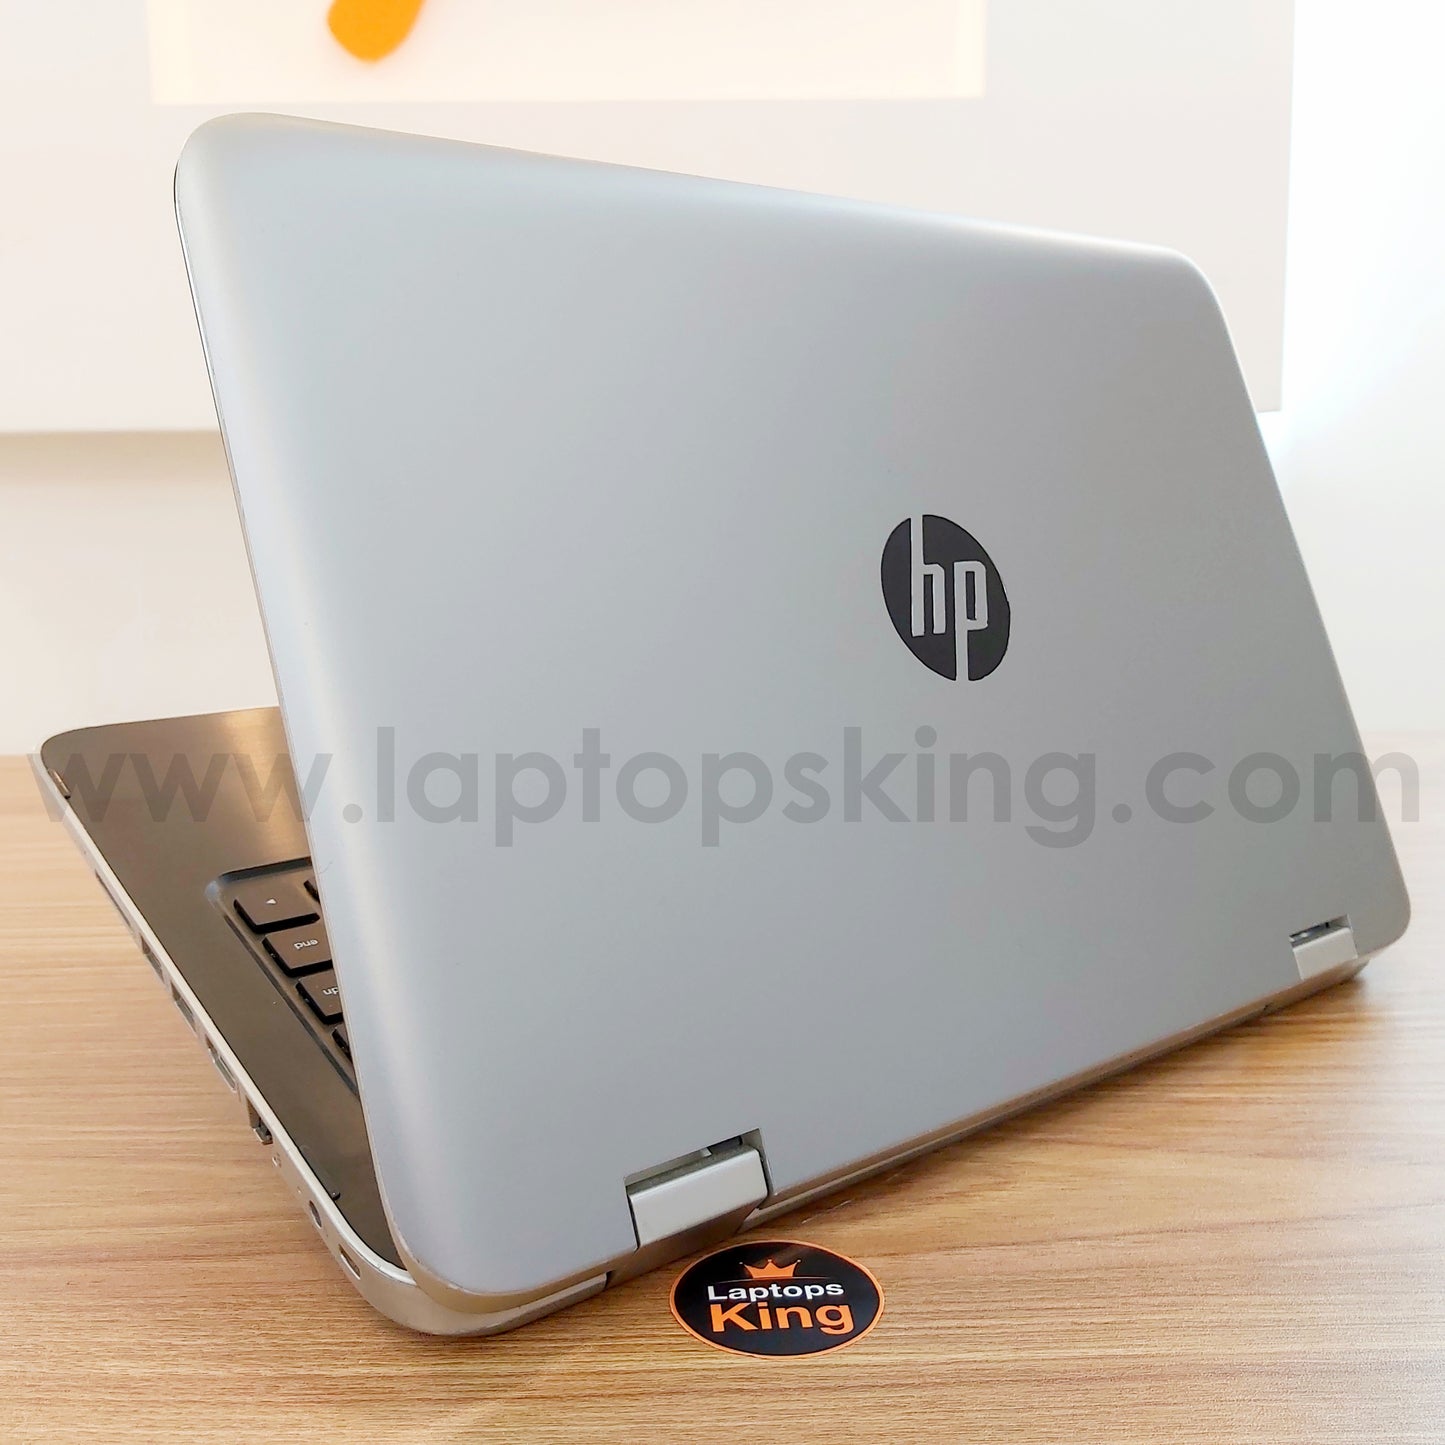 HP Pavilion 13 Core i3 4gb Ram 500gb Hdd 13.3" Laptop (Used Very Clean)